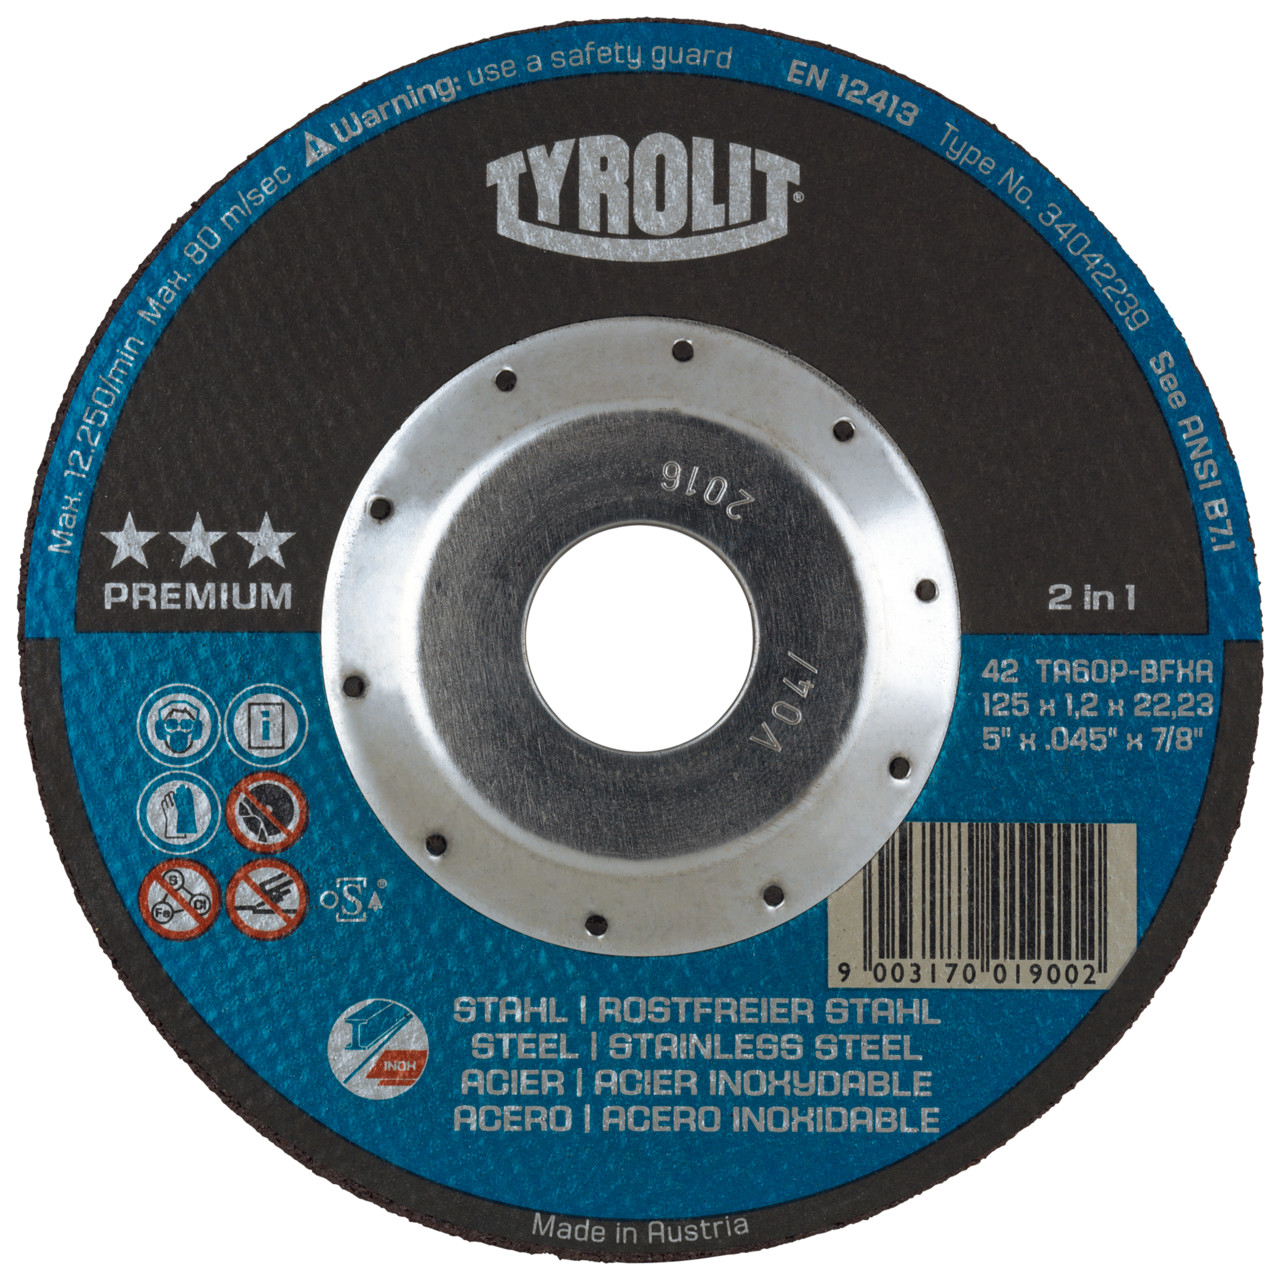 Tyrolit Cut-off wheels DxUxH 125x1.2x22.23 Super-thin cut-off wheels for steel and stainless steel, shape: 42 - offset version, Art. 34472852